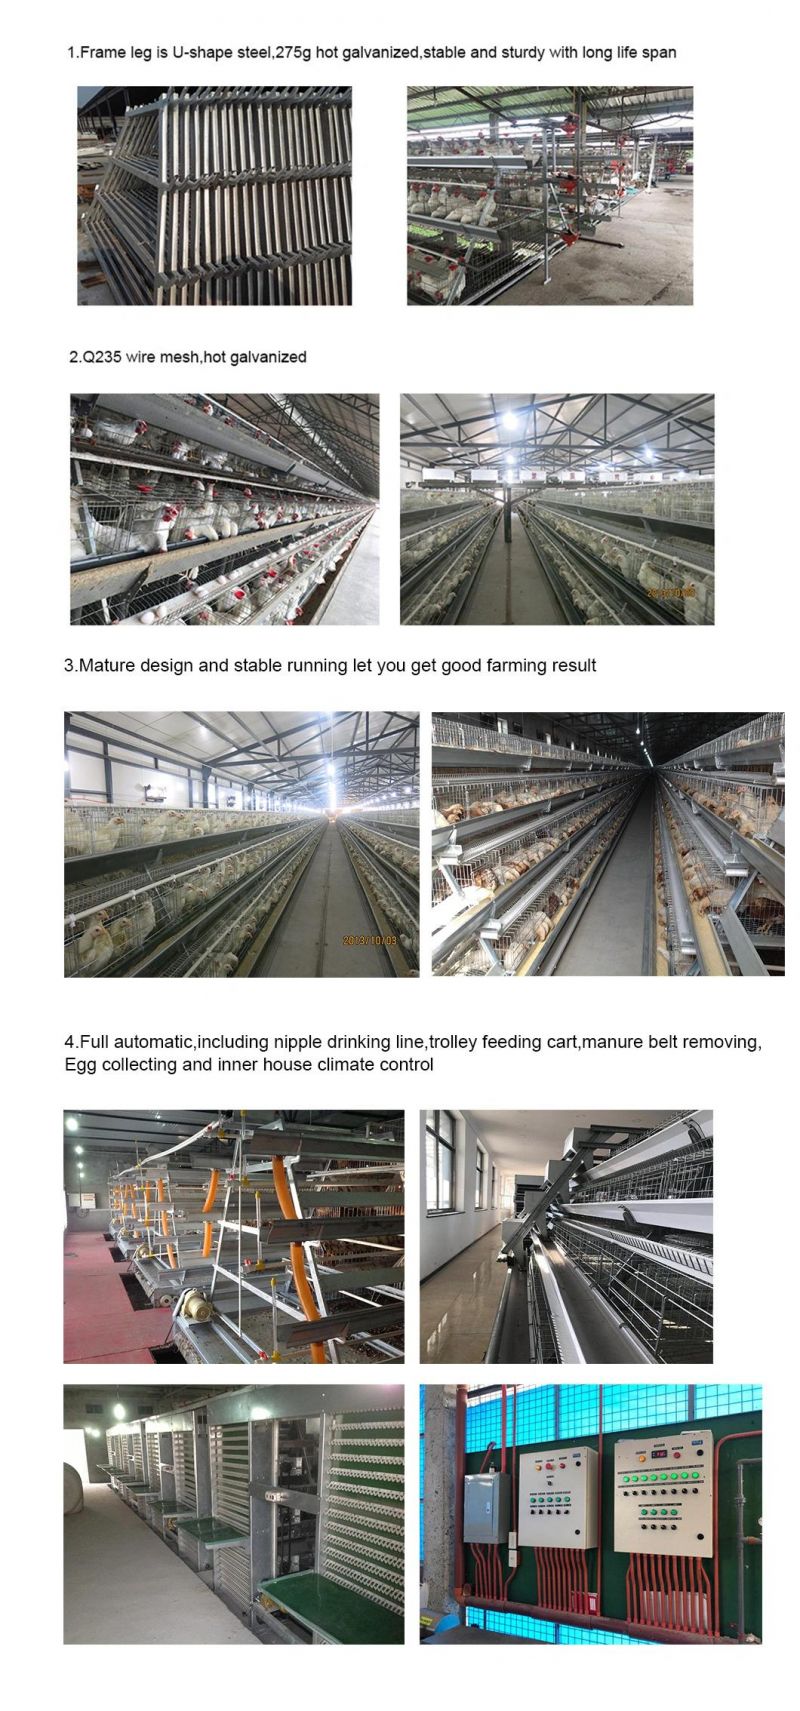 Longfeng High Density Comprehensive Solution for Poultry Farm Good Service Layer Cage